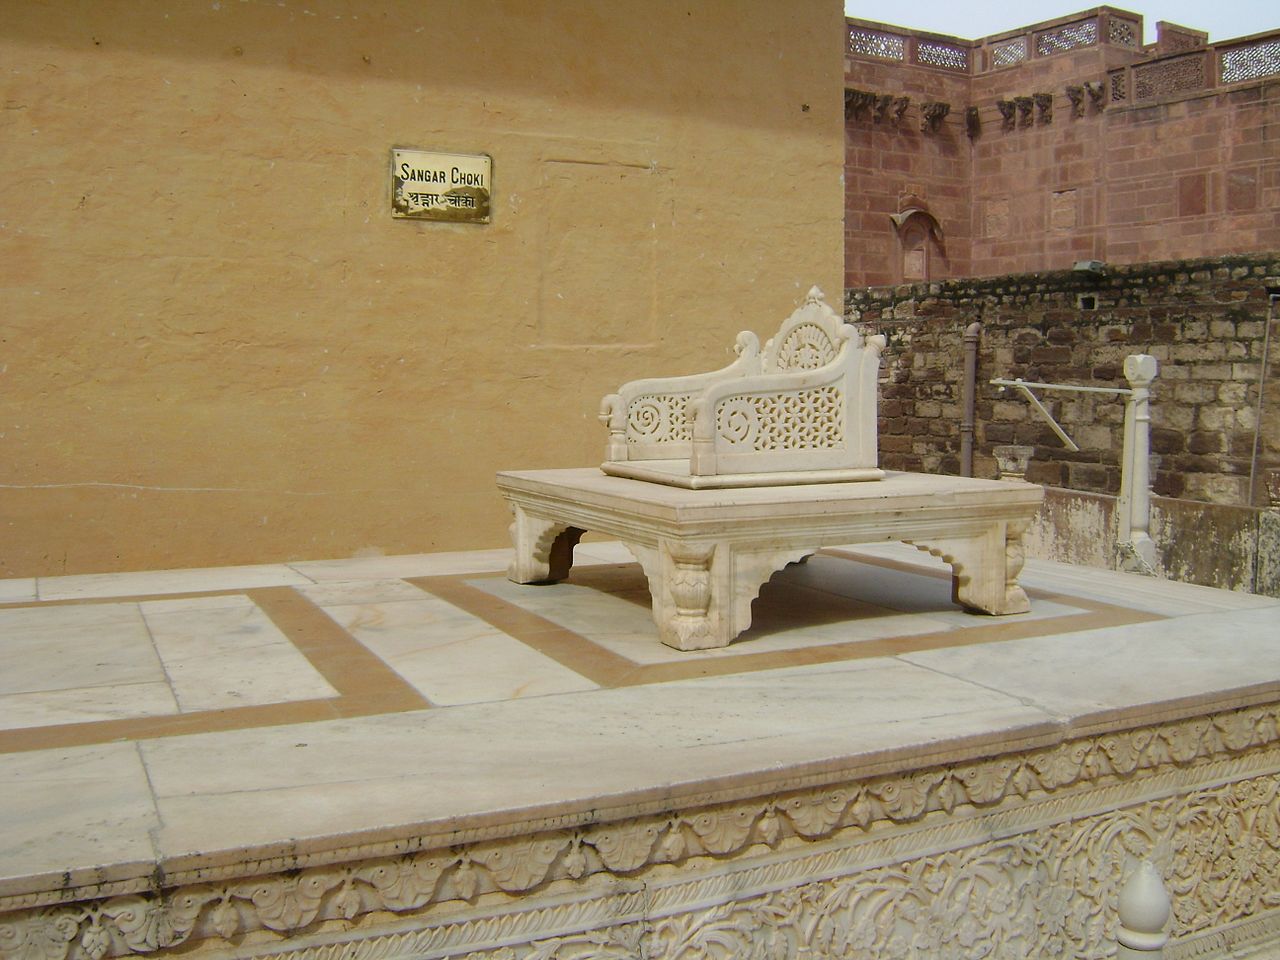 Marble throne at Shringar Chowk. Image Source: Wikimedia Commons